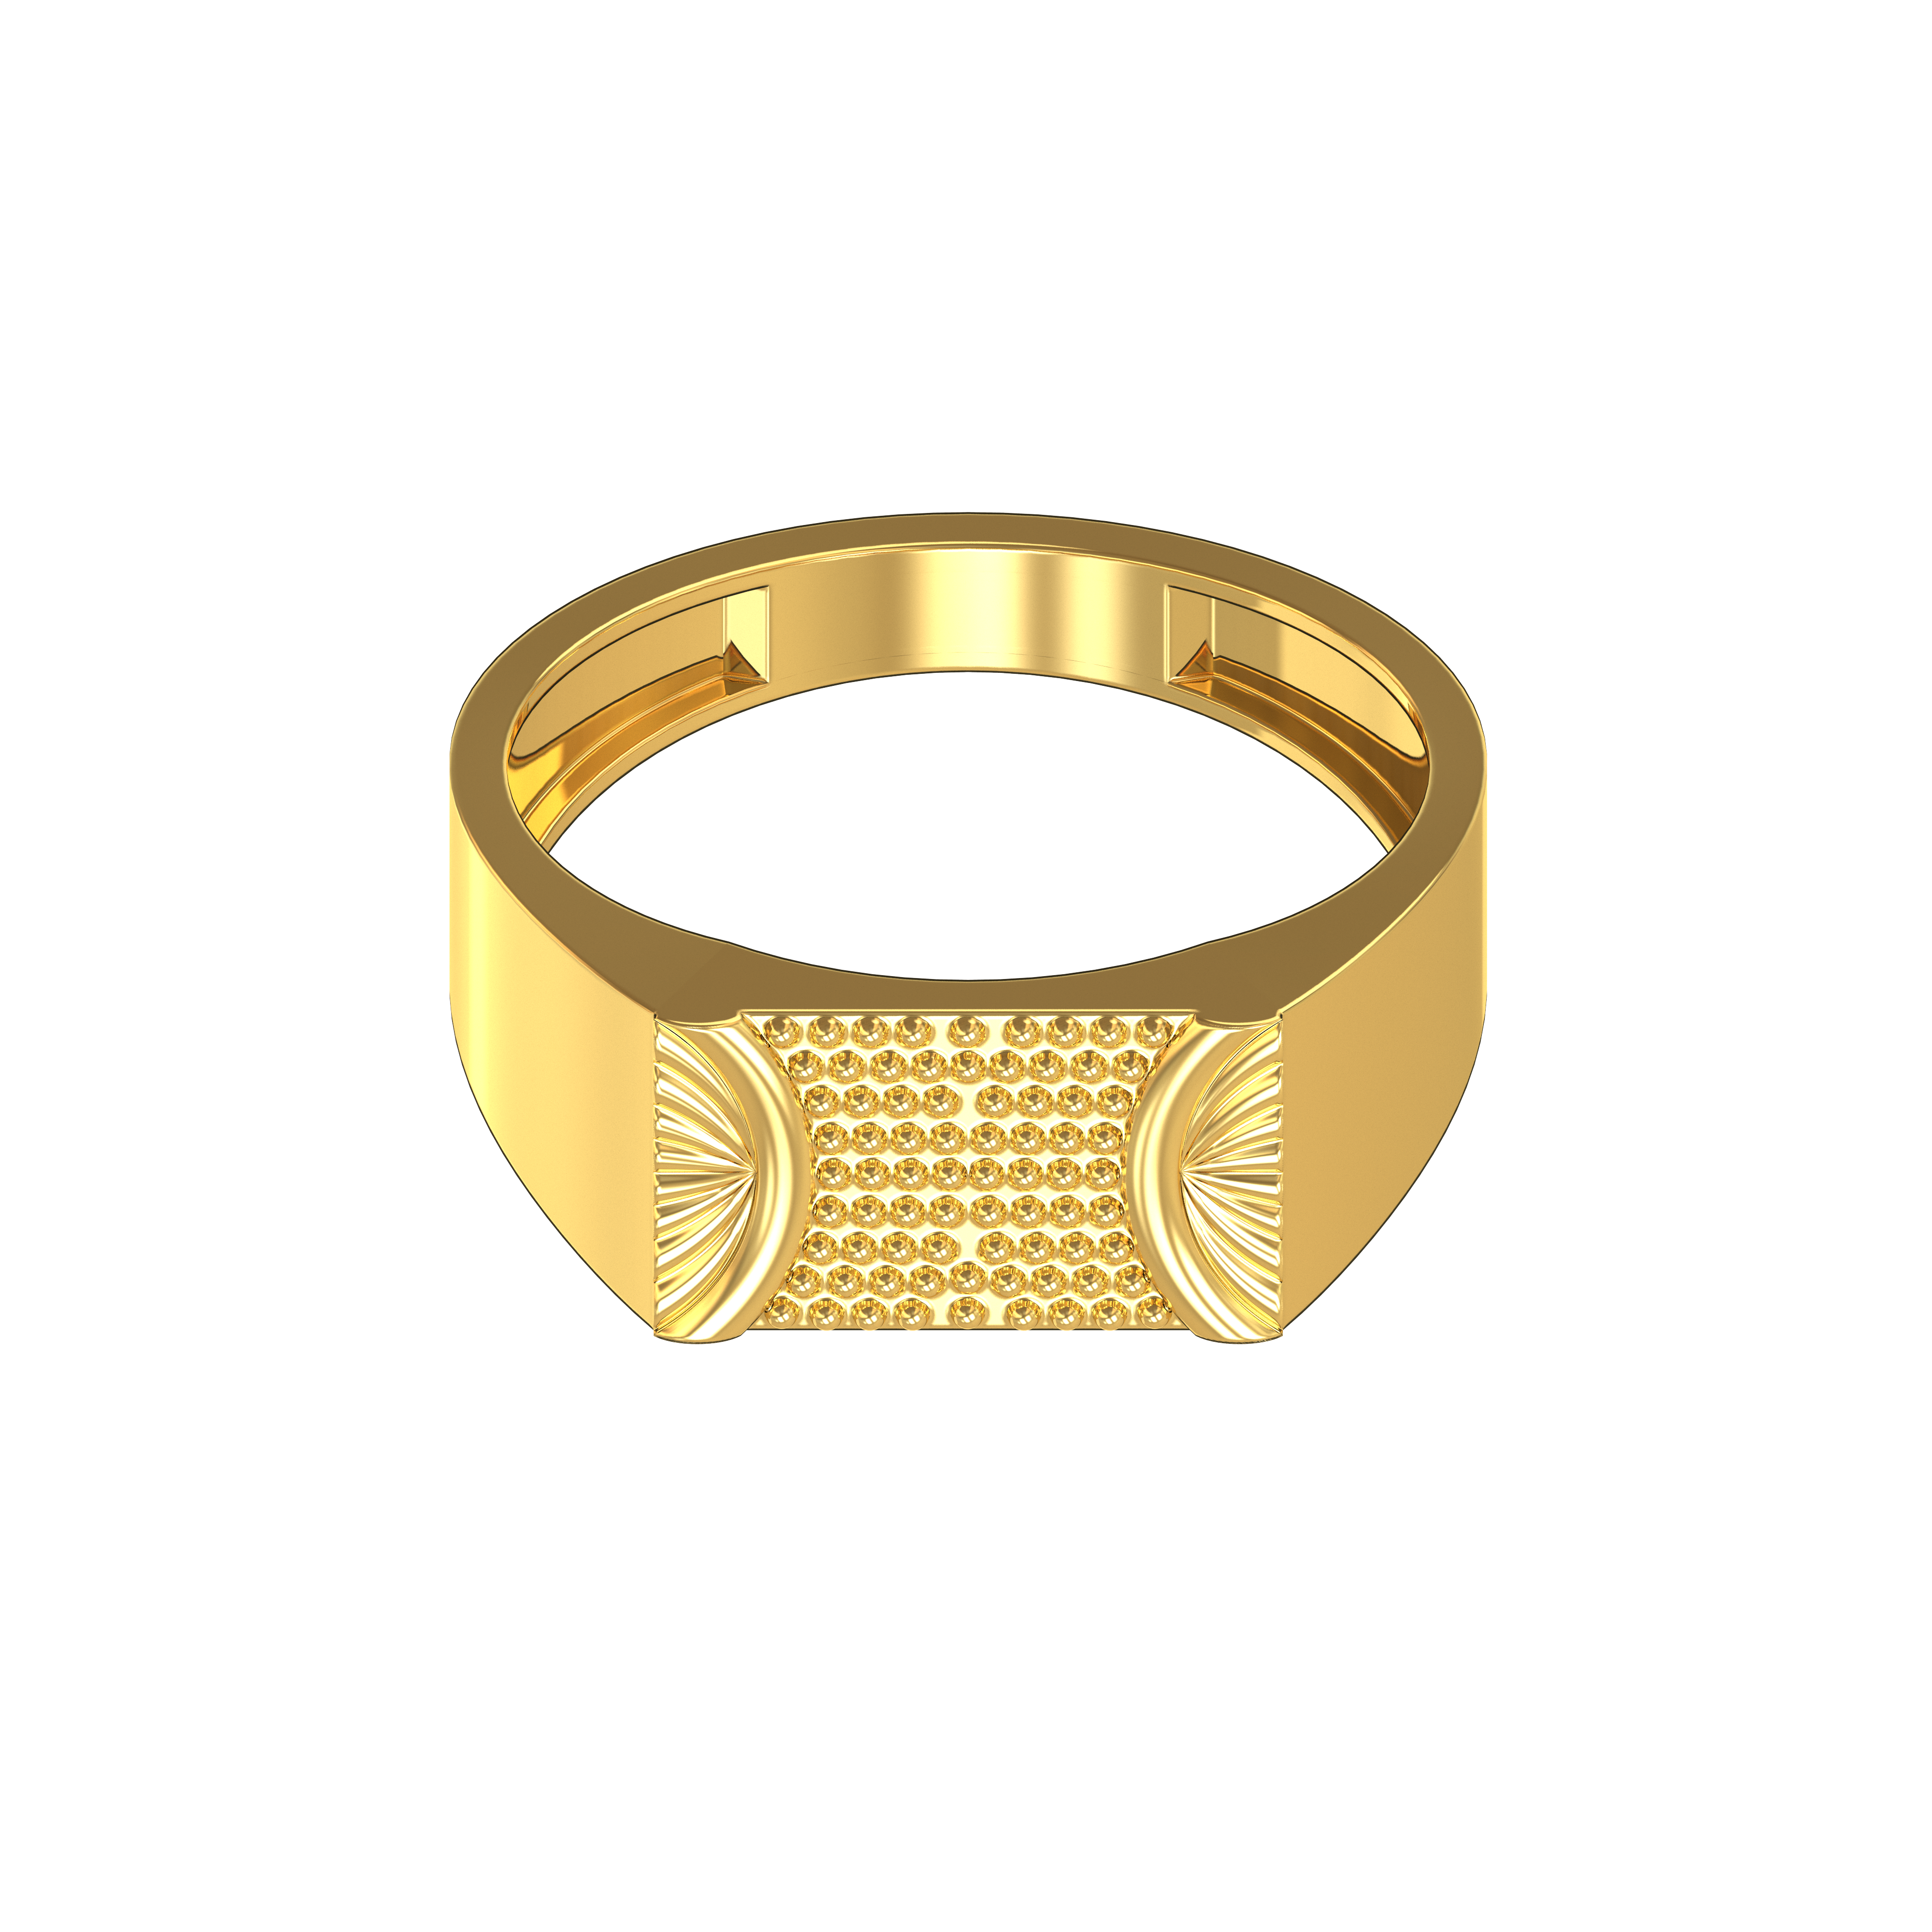 22 Kt Gold Mens Initial Ring - RiMs26422 - 22 Kt Gold Men's Initial Ring. Gold  ring for men's is designed with laser cut work and frost finish